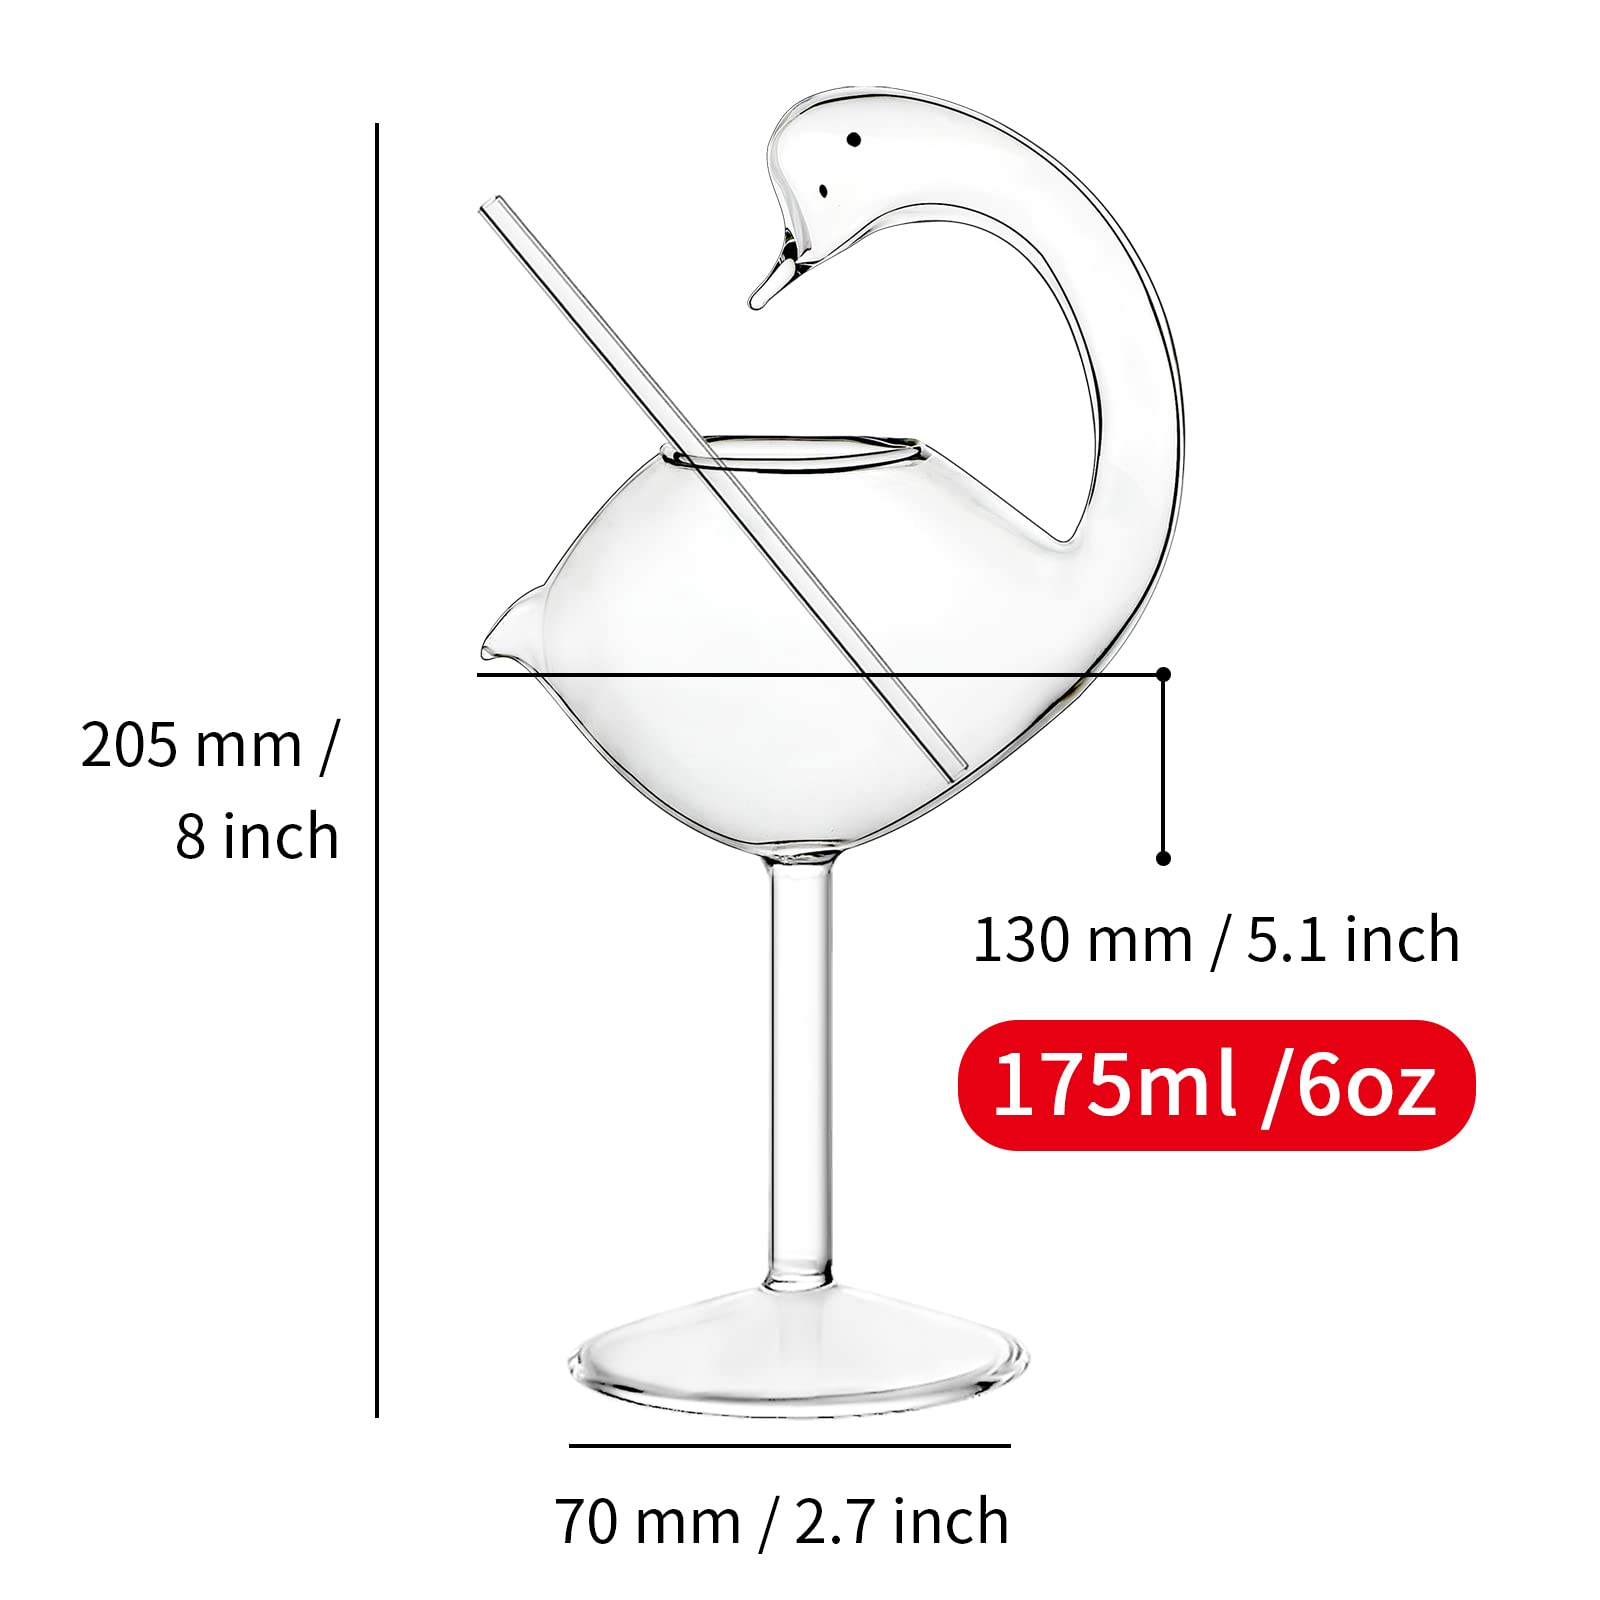 Brand Generic Cocktail Glass - Set of 2 Swan Glass 6oz Creative Drinking Glasses Wedding Gift for Juice, Martini, tequila, margarita